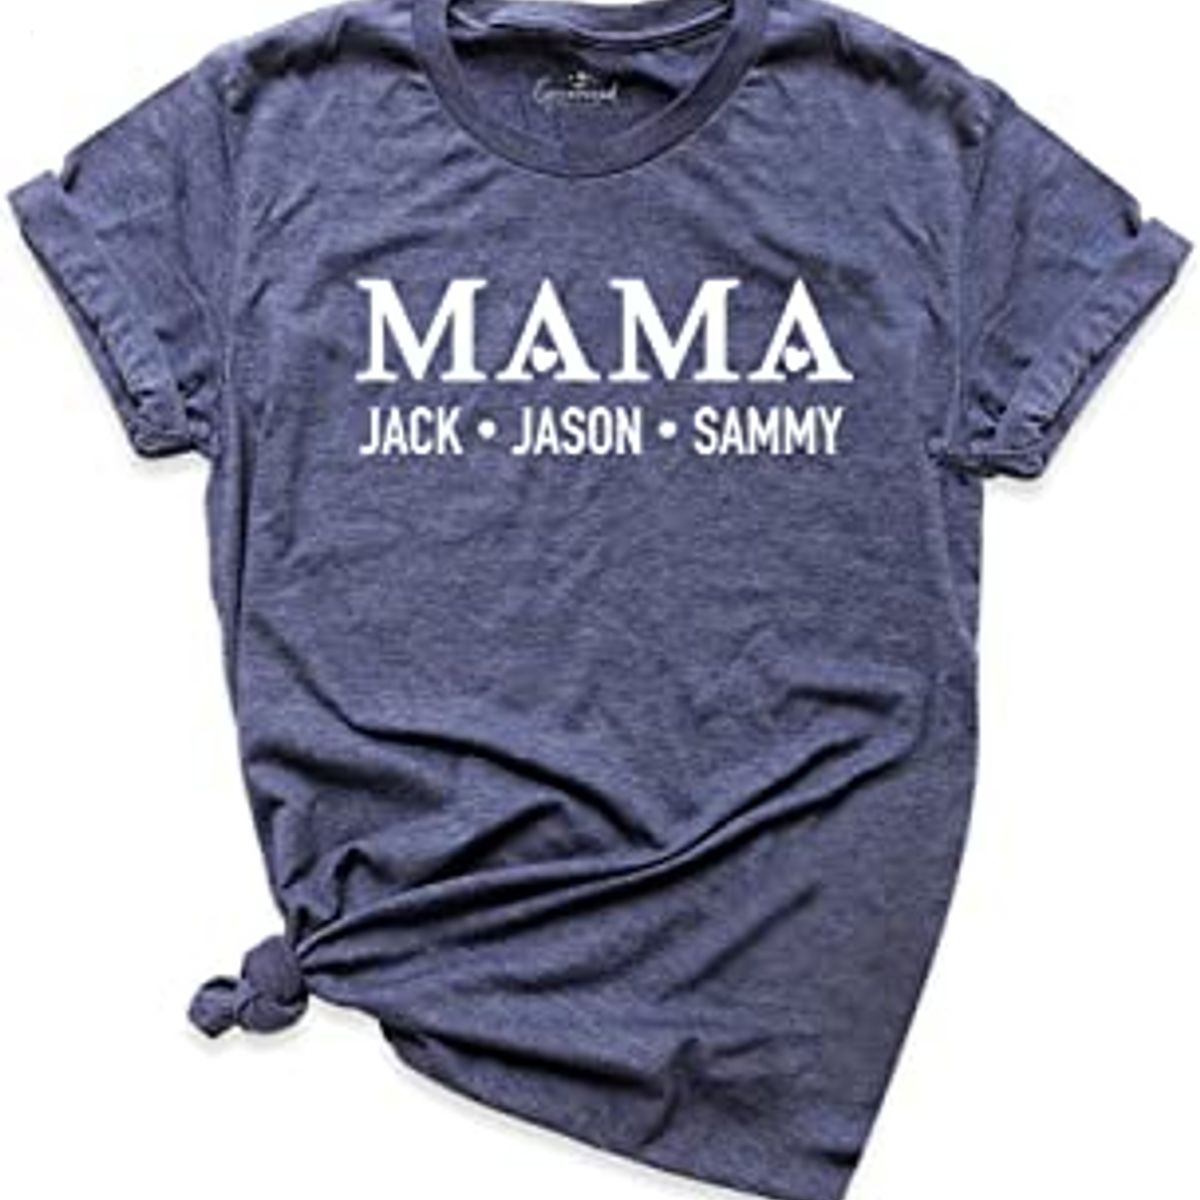 Custom Mama Shirt, Mom Shirts with Kids Names, Mothers Day T-Shirt, Personalized Mama Graphic Tees, Short Sleeve, O Neck, V-Neck Gift Shirt for Mama. Mother’s Day